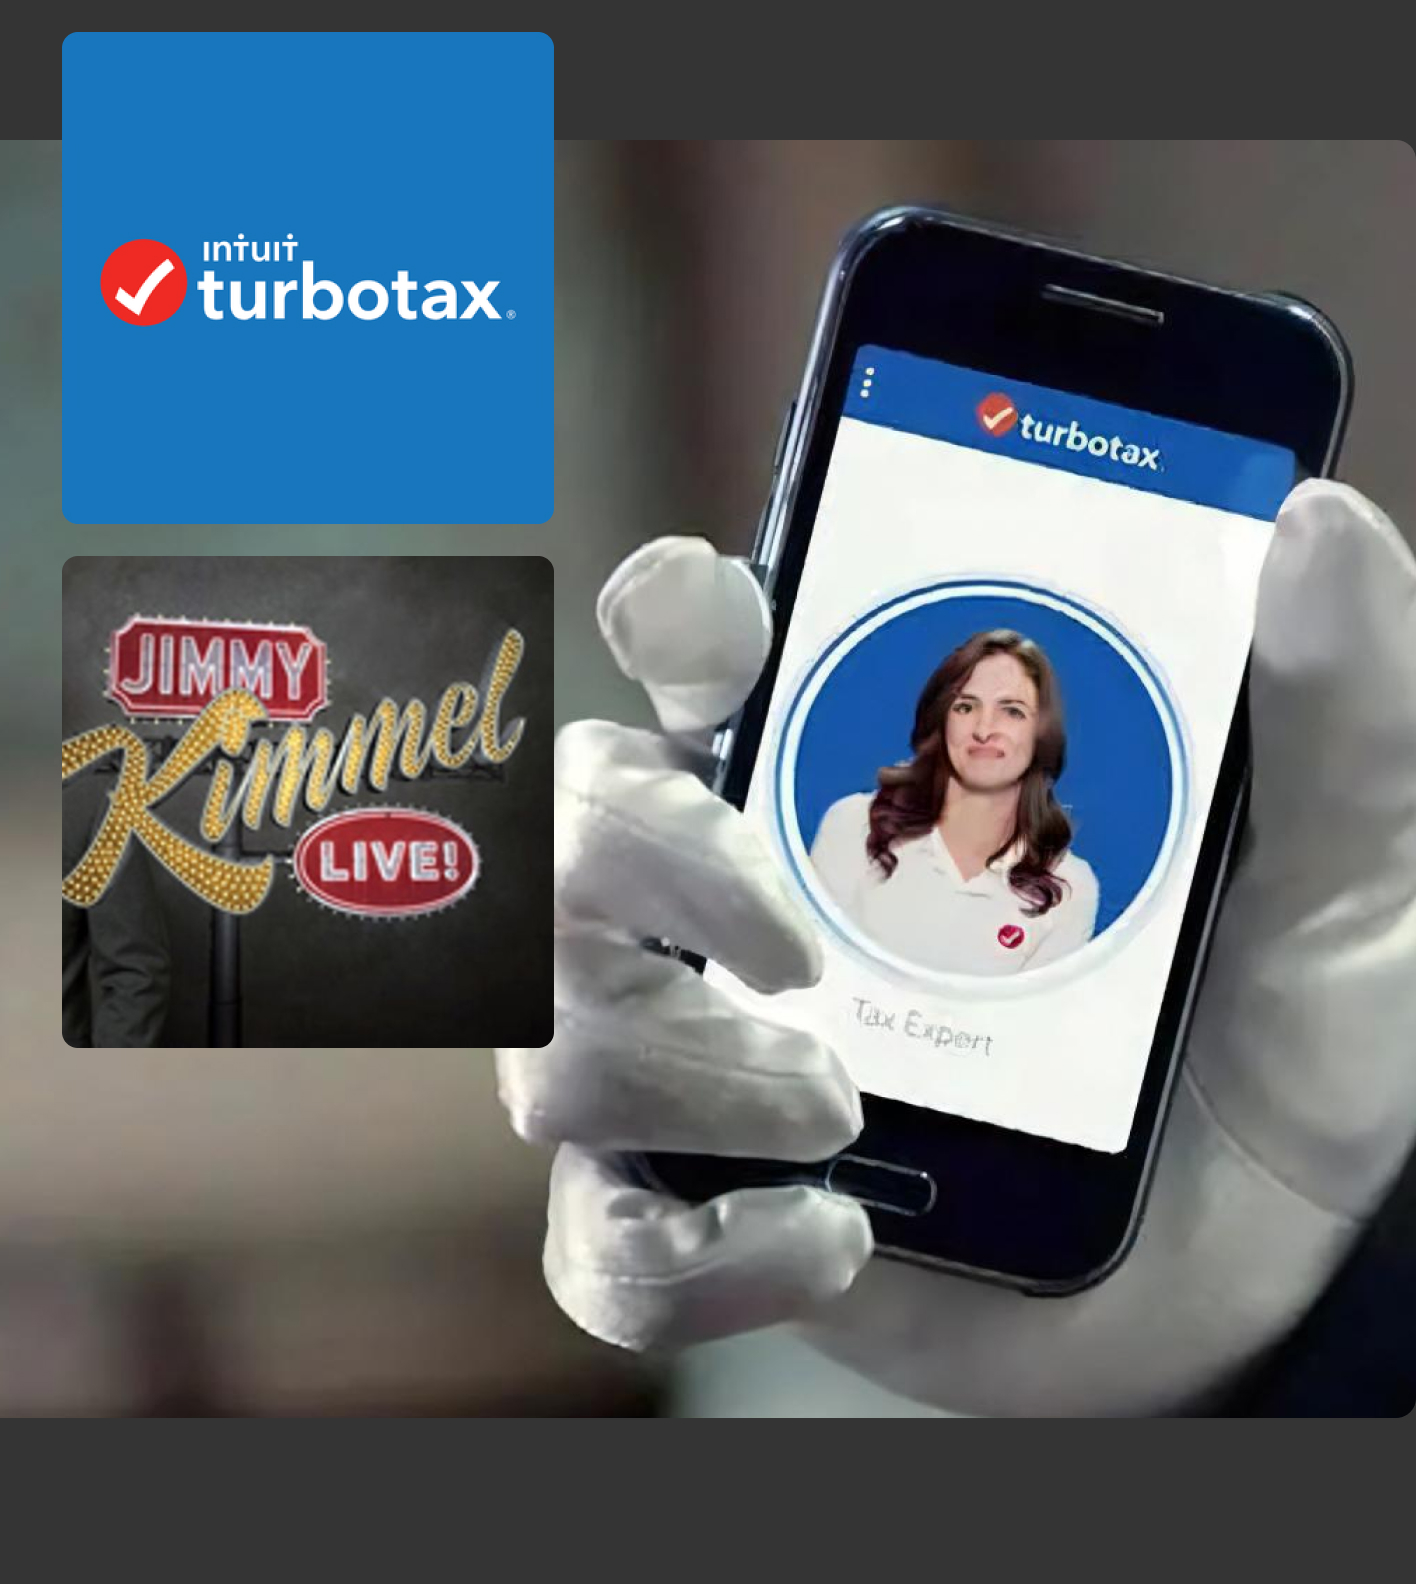 Holding a smartphone showing the TurboTax app